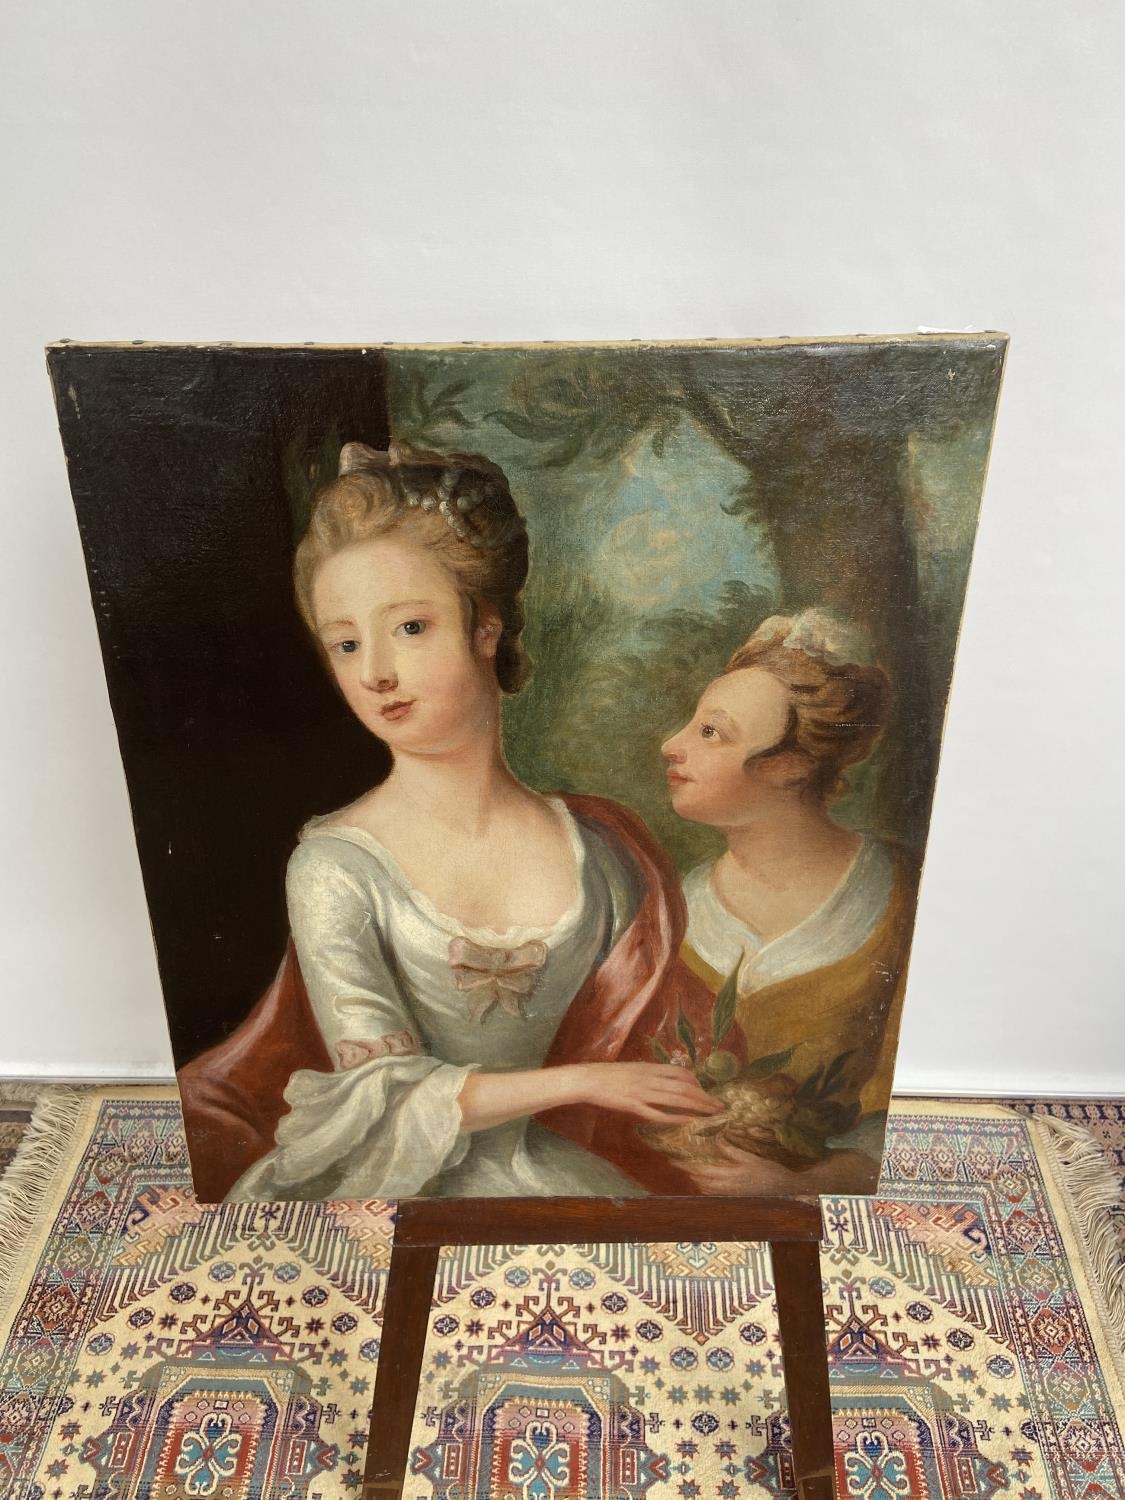 An 18th/19th century oil painting on canvas depicting two ladies posing [74x61cm]